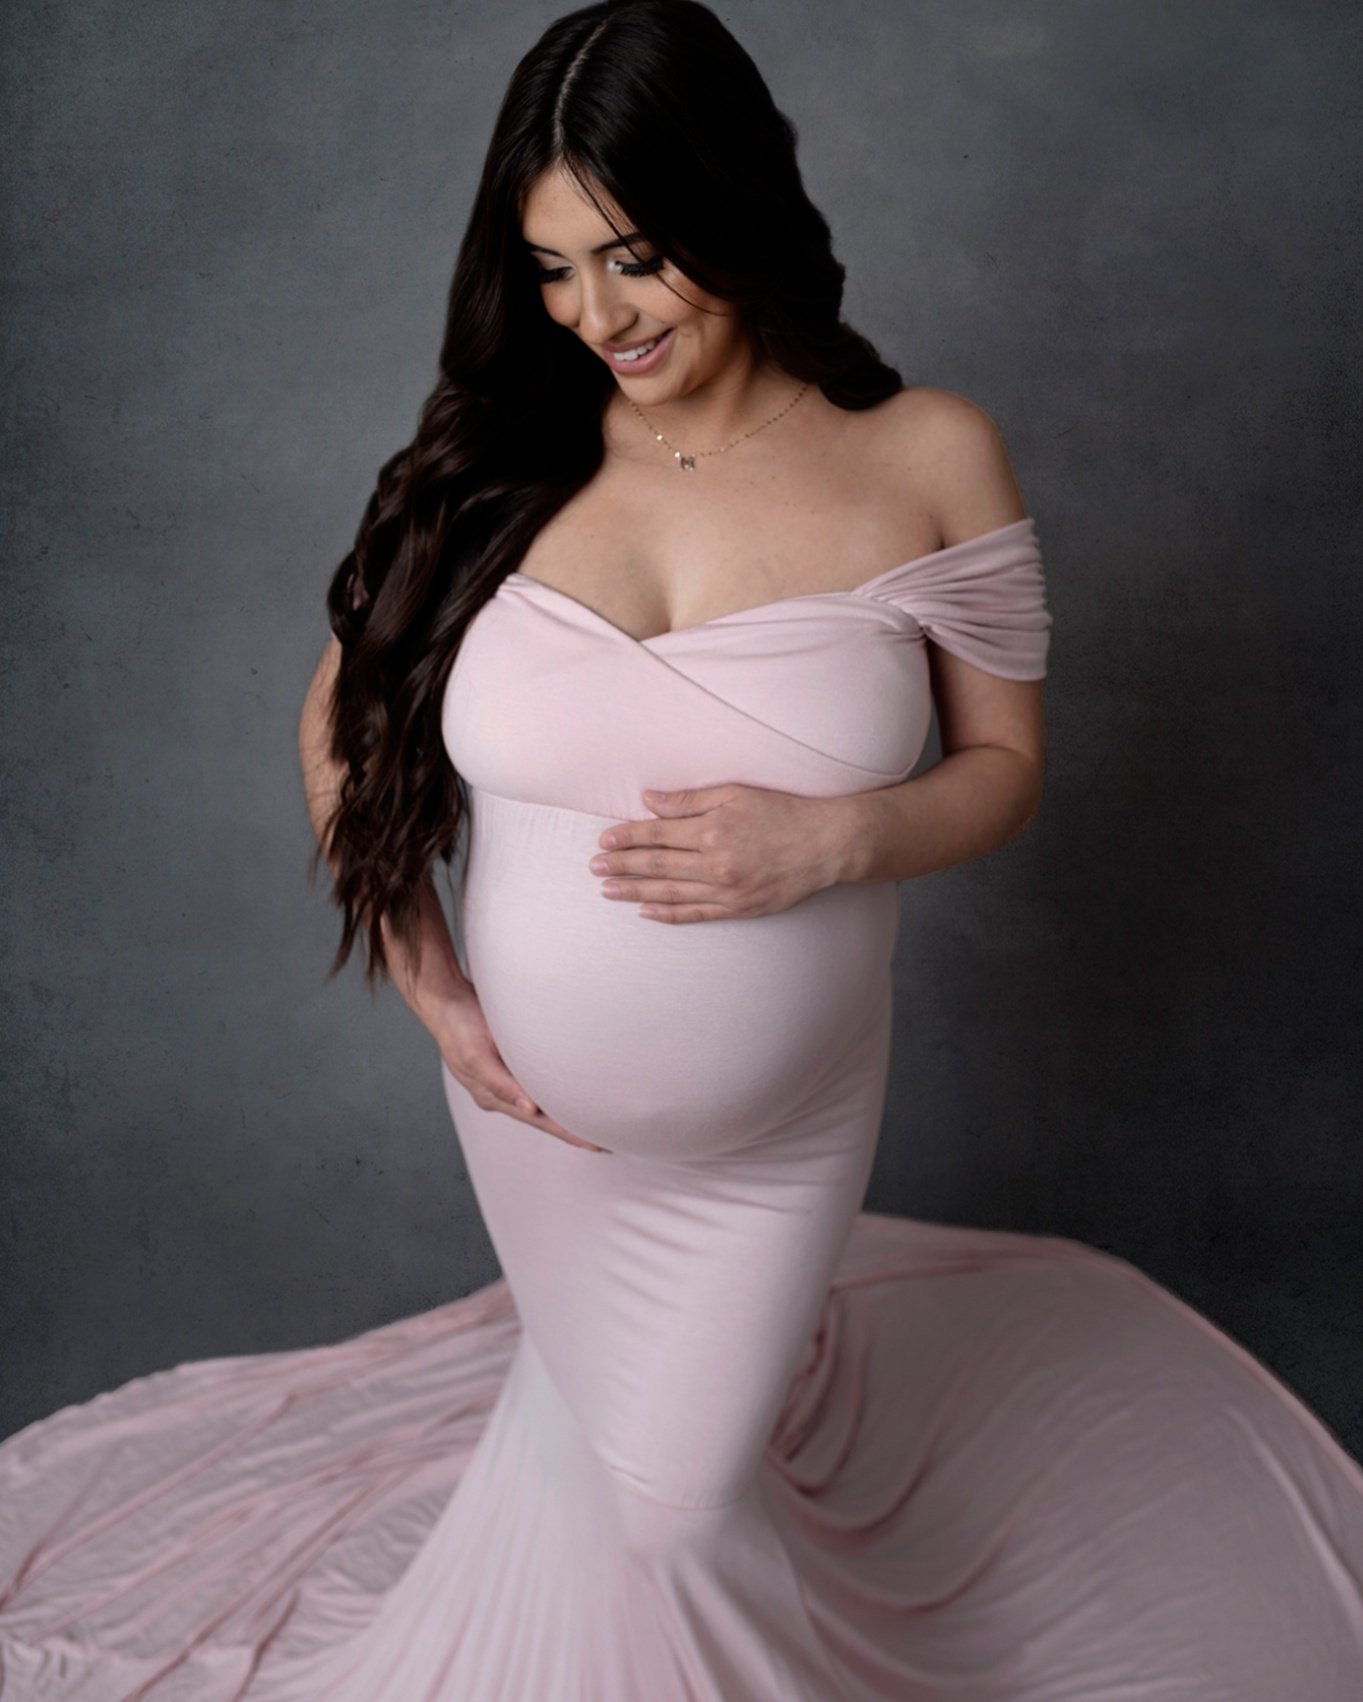 This momma rocked this session and looked stunning in this pink gown ❤️